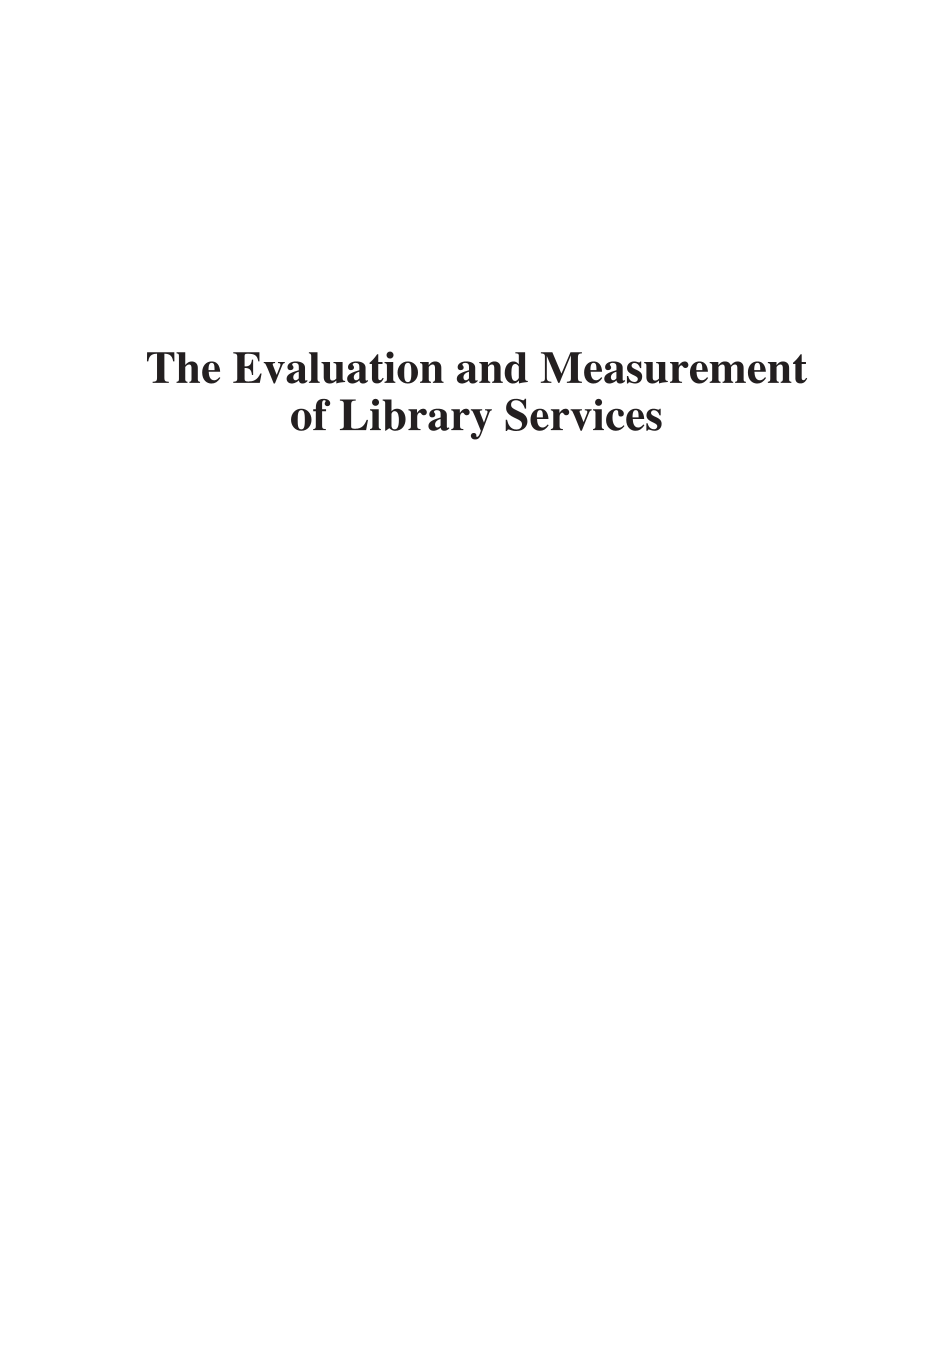 The Evaluation and Measurement of Library Services, 2nd Edition page i